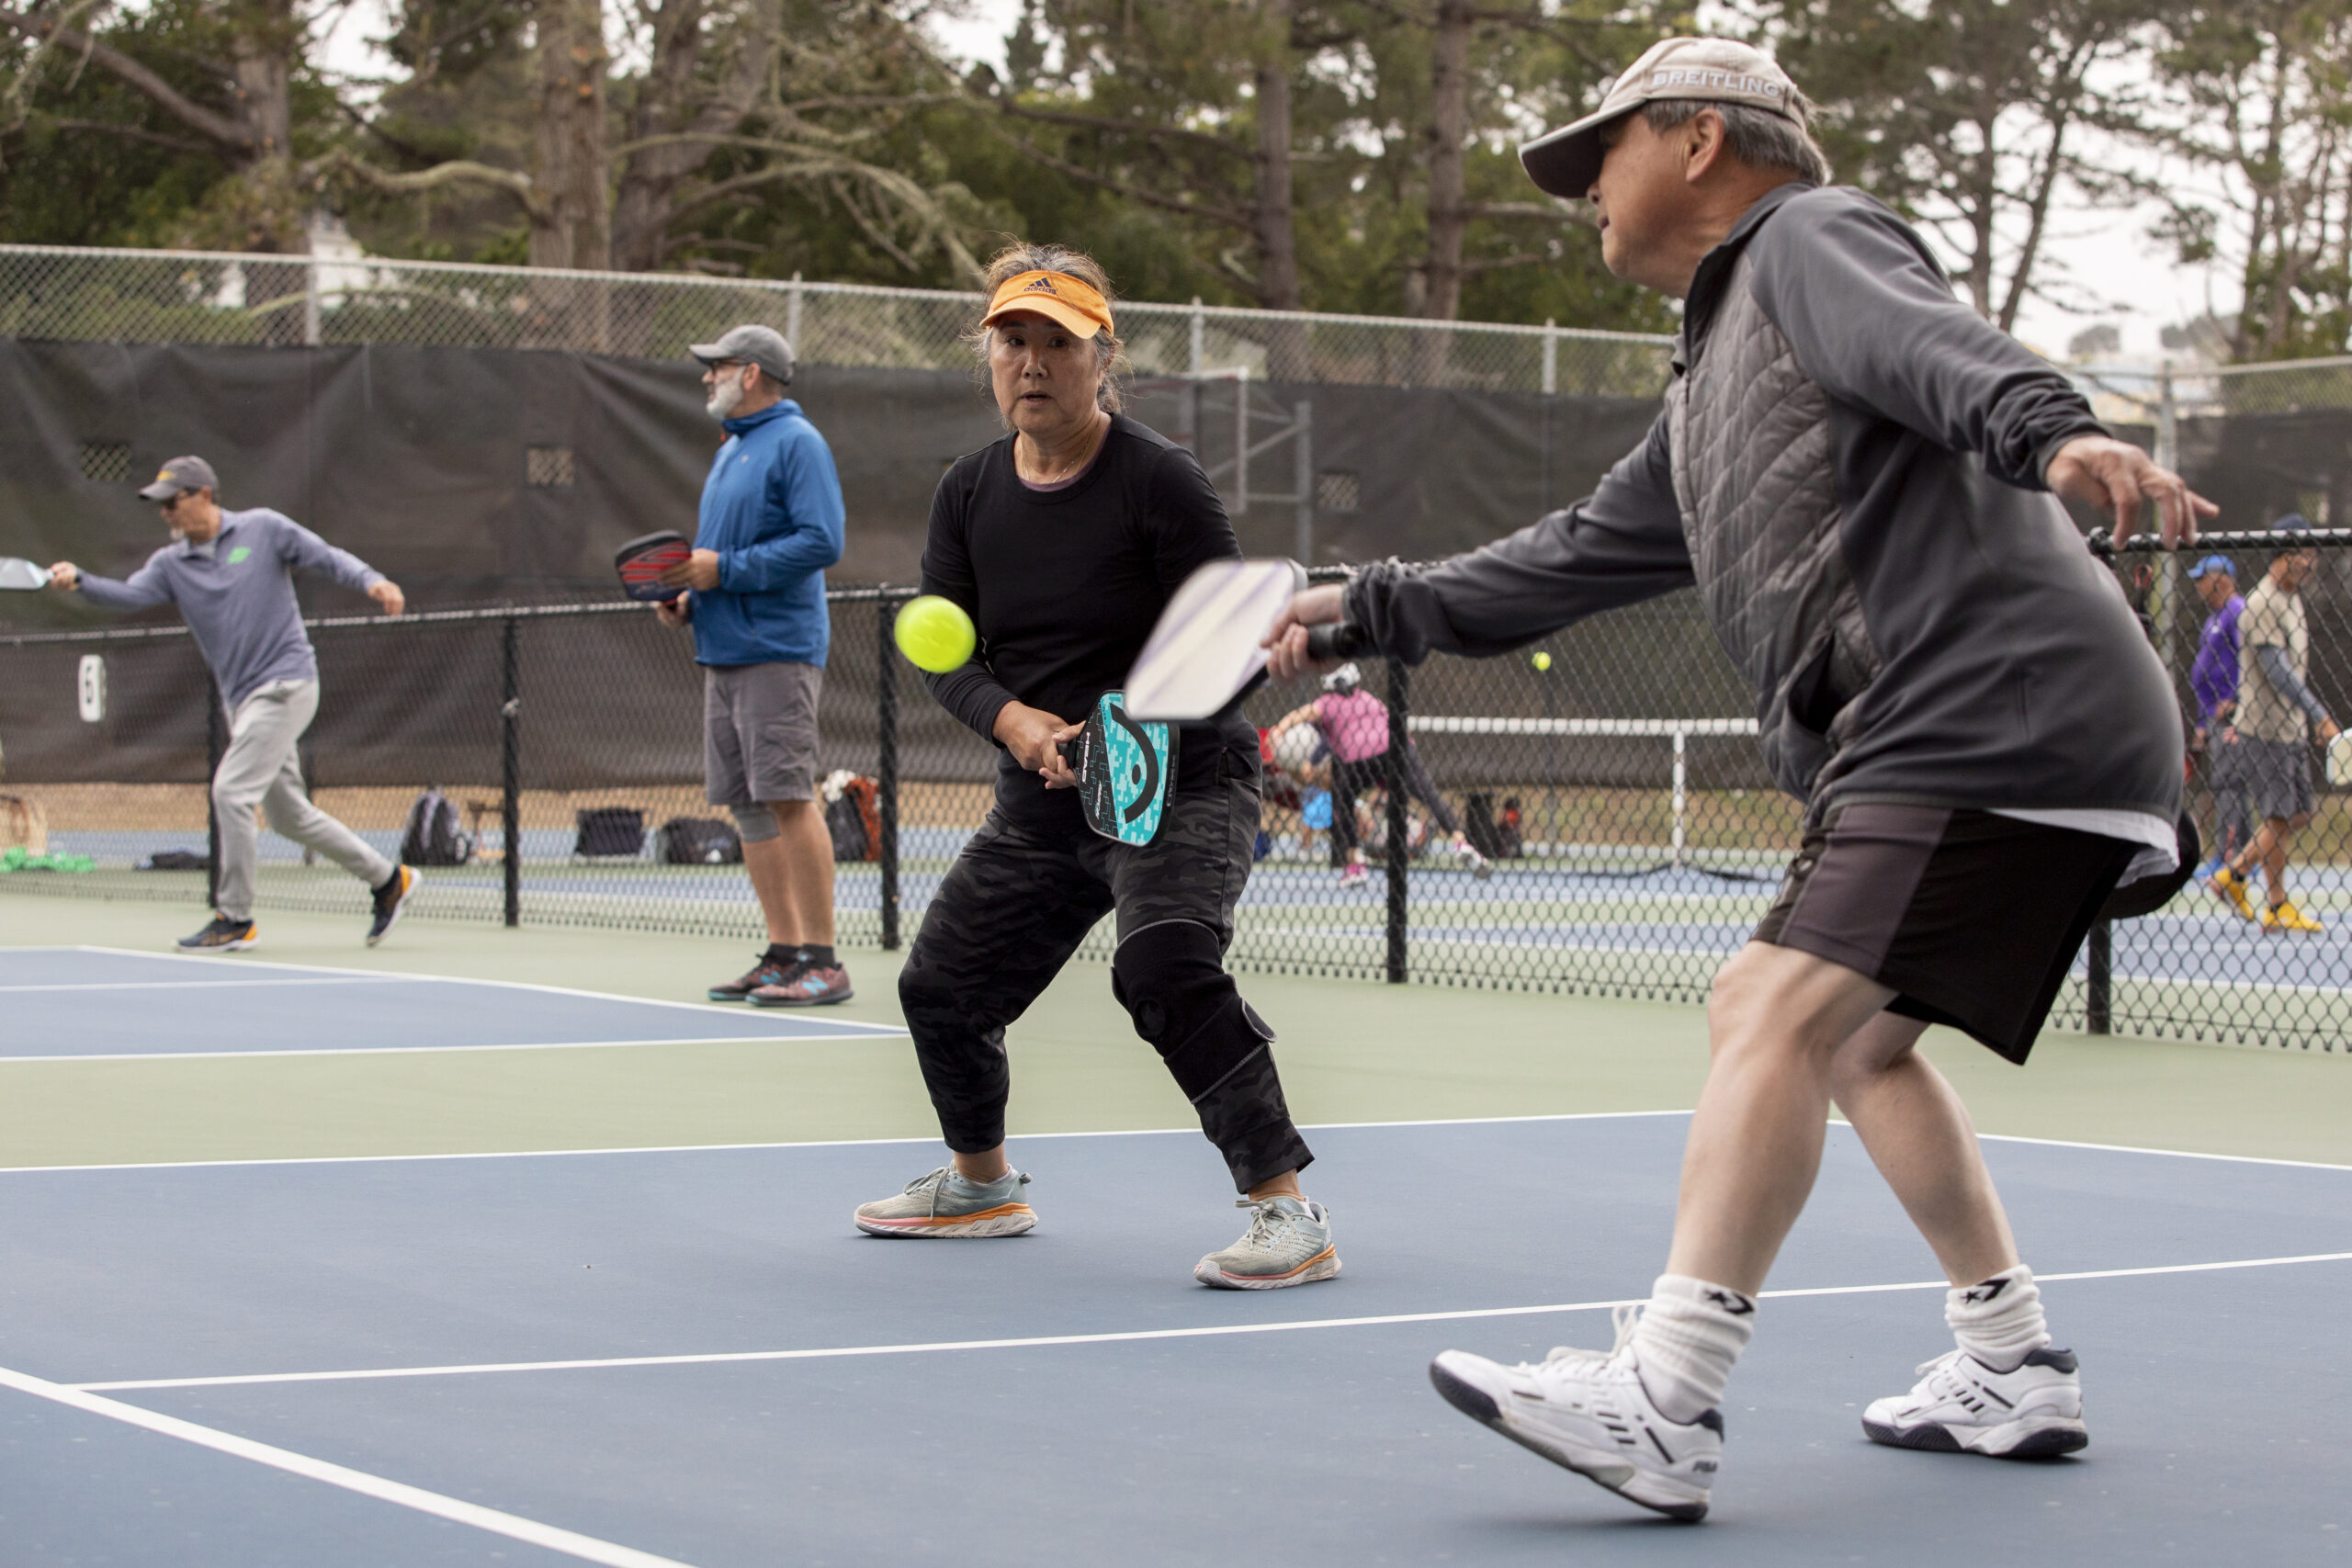 SF’s pickleball community scores 8 permanent courts—but not everyone is happy